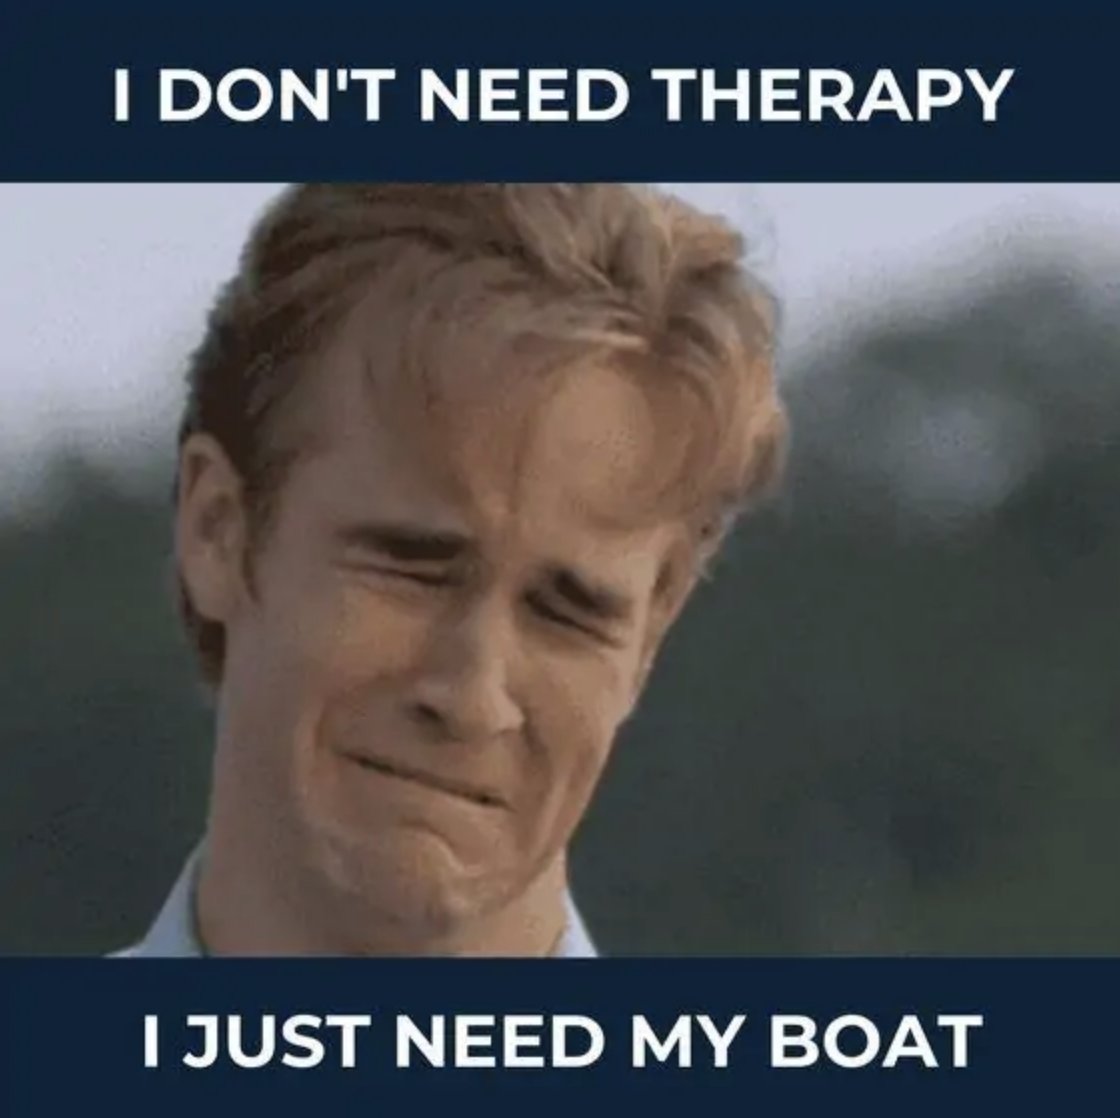 Happy Meme Sunday! When boat is the new therapy! Like and comment if you agree! 😁